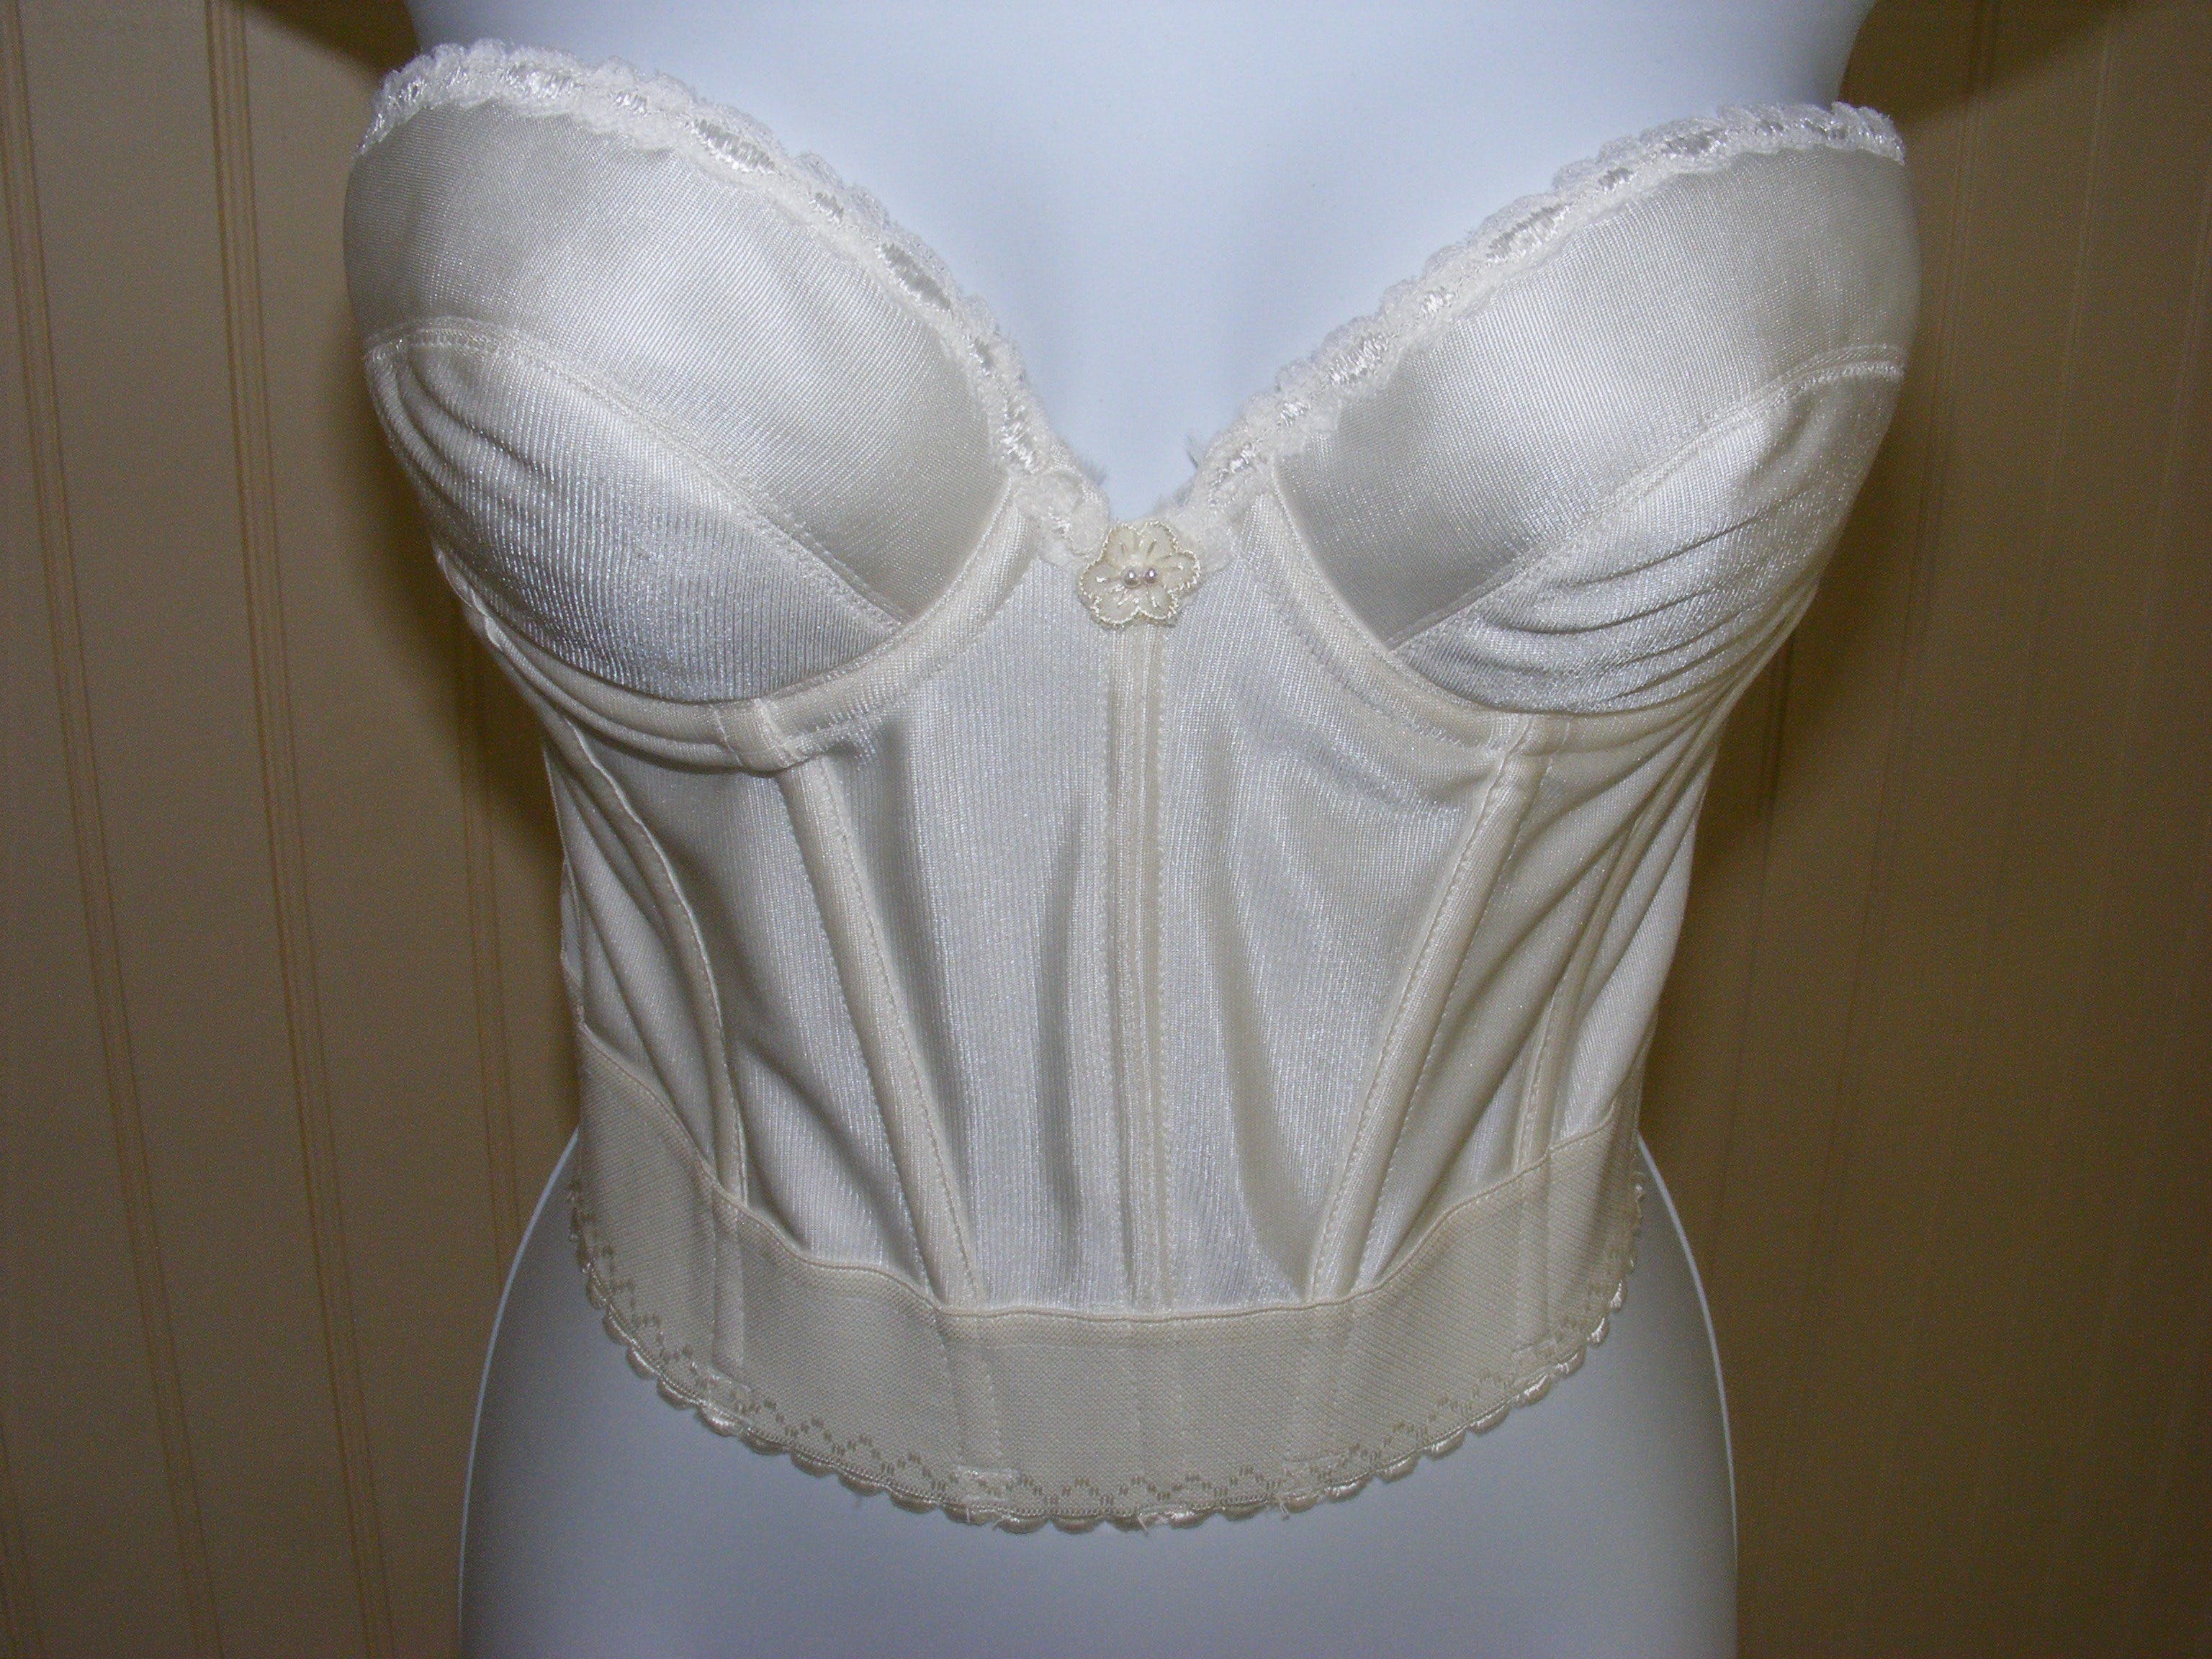 http://shopthrilling.com/cdn/shop/products/80-s-36-a-white-bustier-bra-by-carnival-by-carnival-product-image__9gJtAB.jpg?v=1640900051